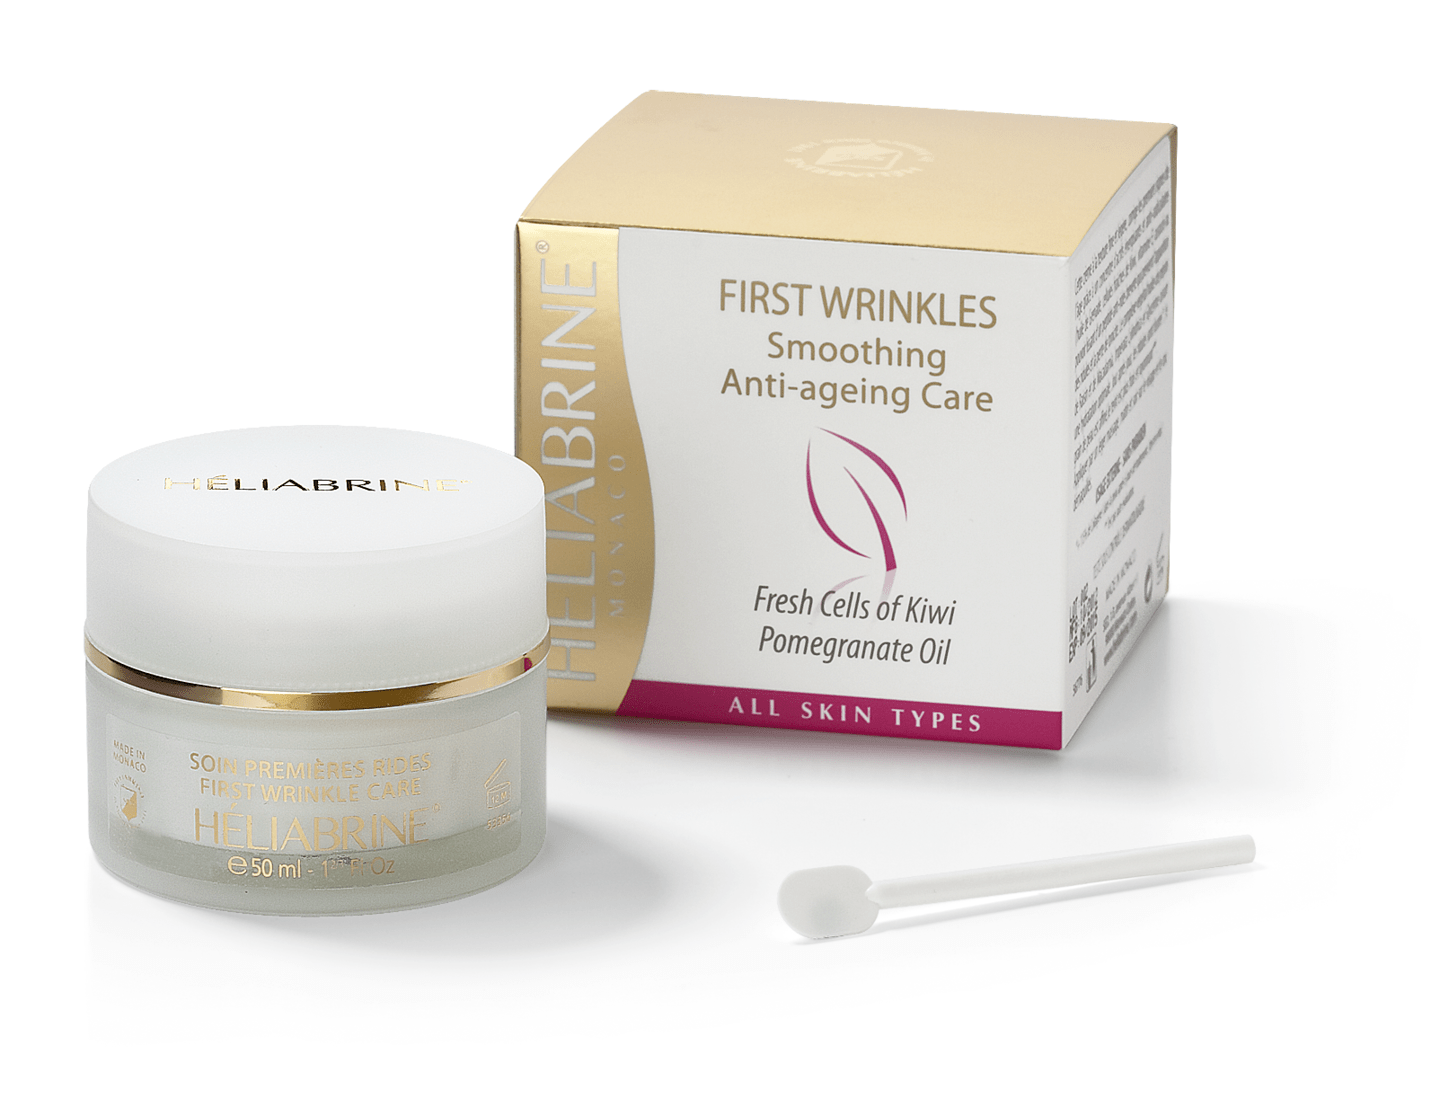 HÉLIABRINE - Smoothing First Wrinkles Creme, 50 ml